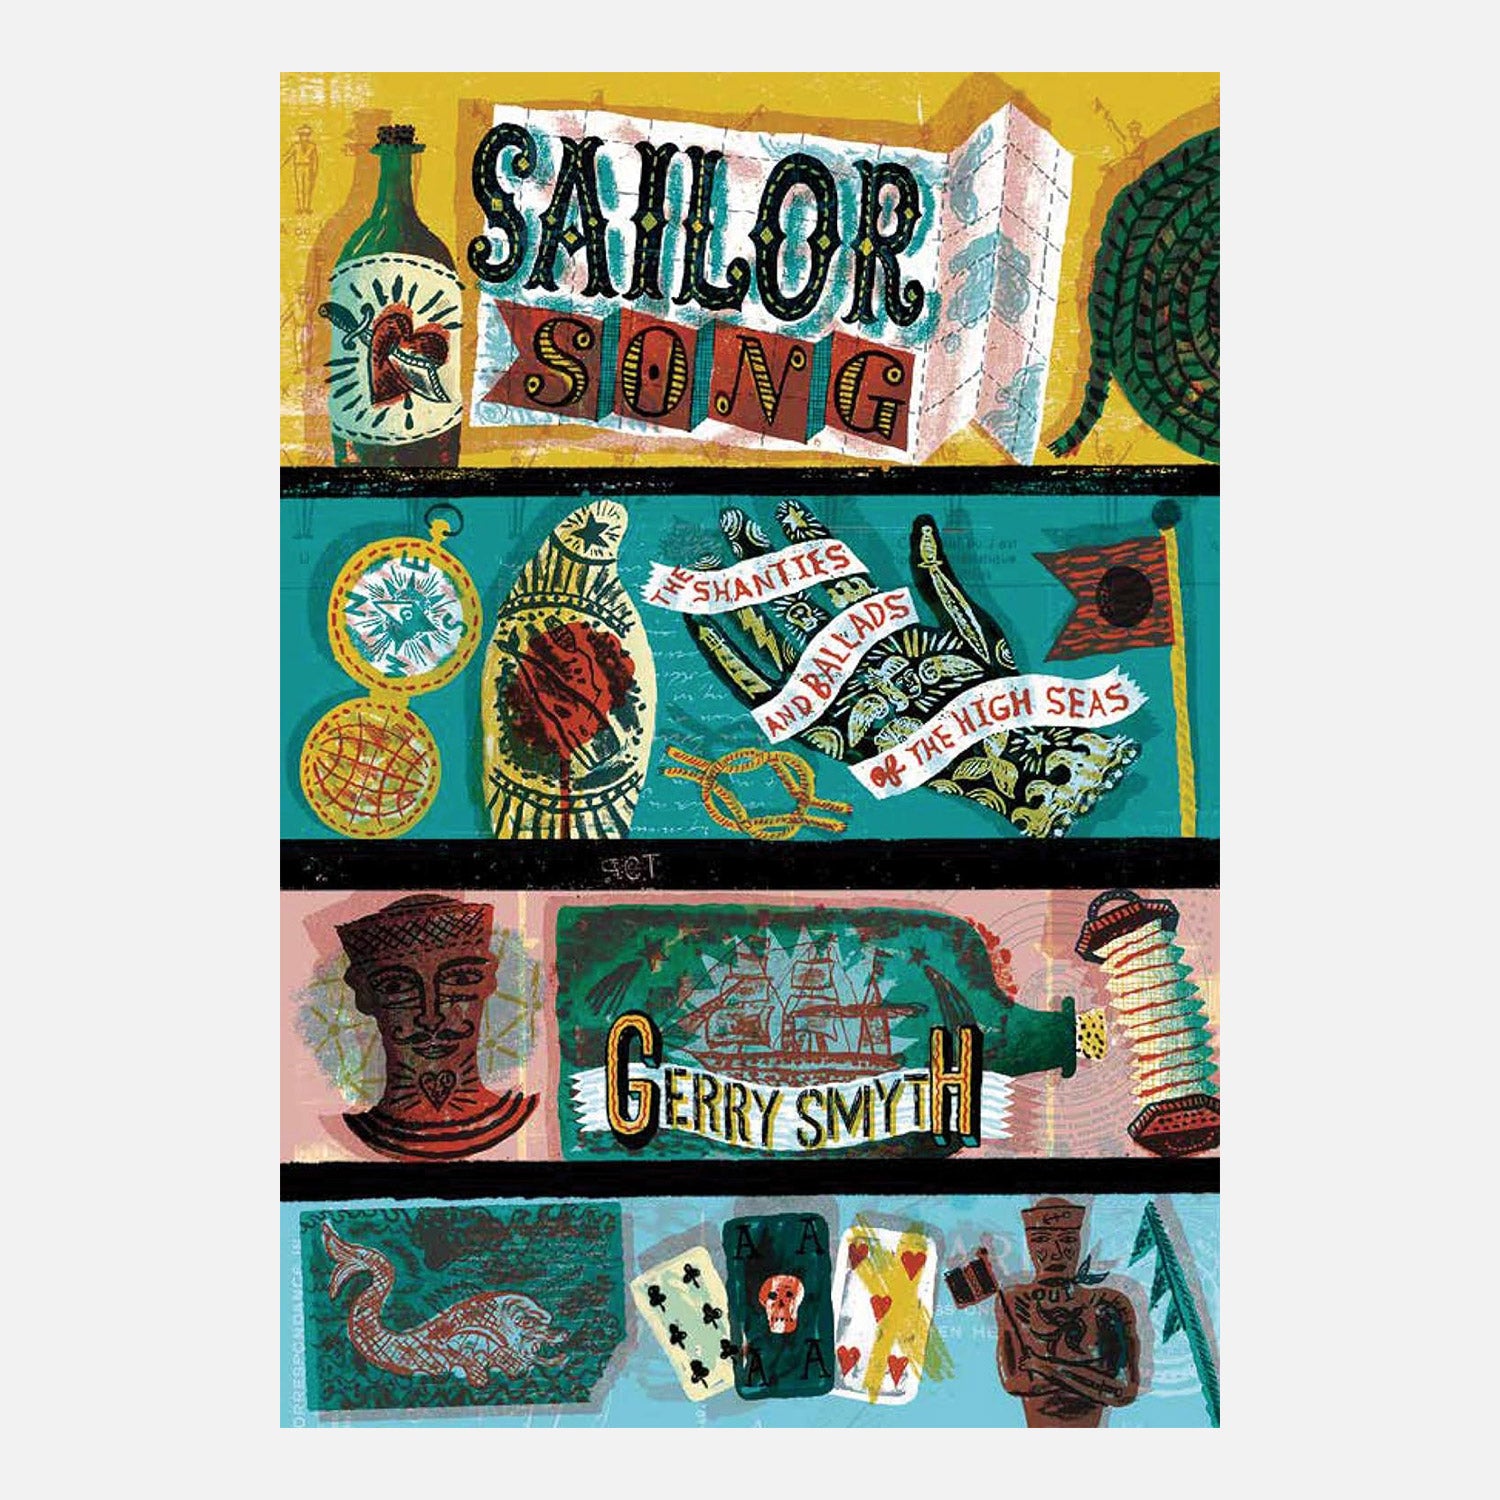 Sailor song the shanties and ballads of the high seas. Colourful illustration of maritime objects on the cover.